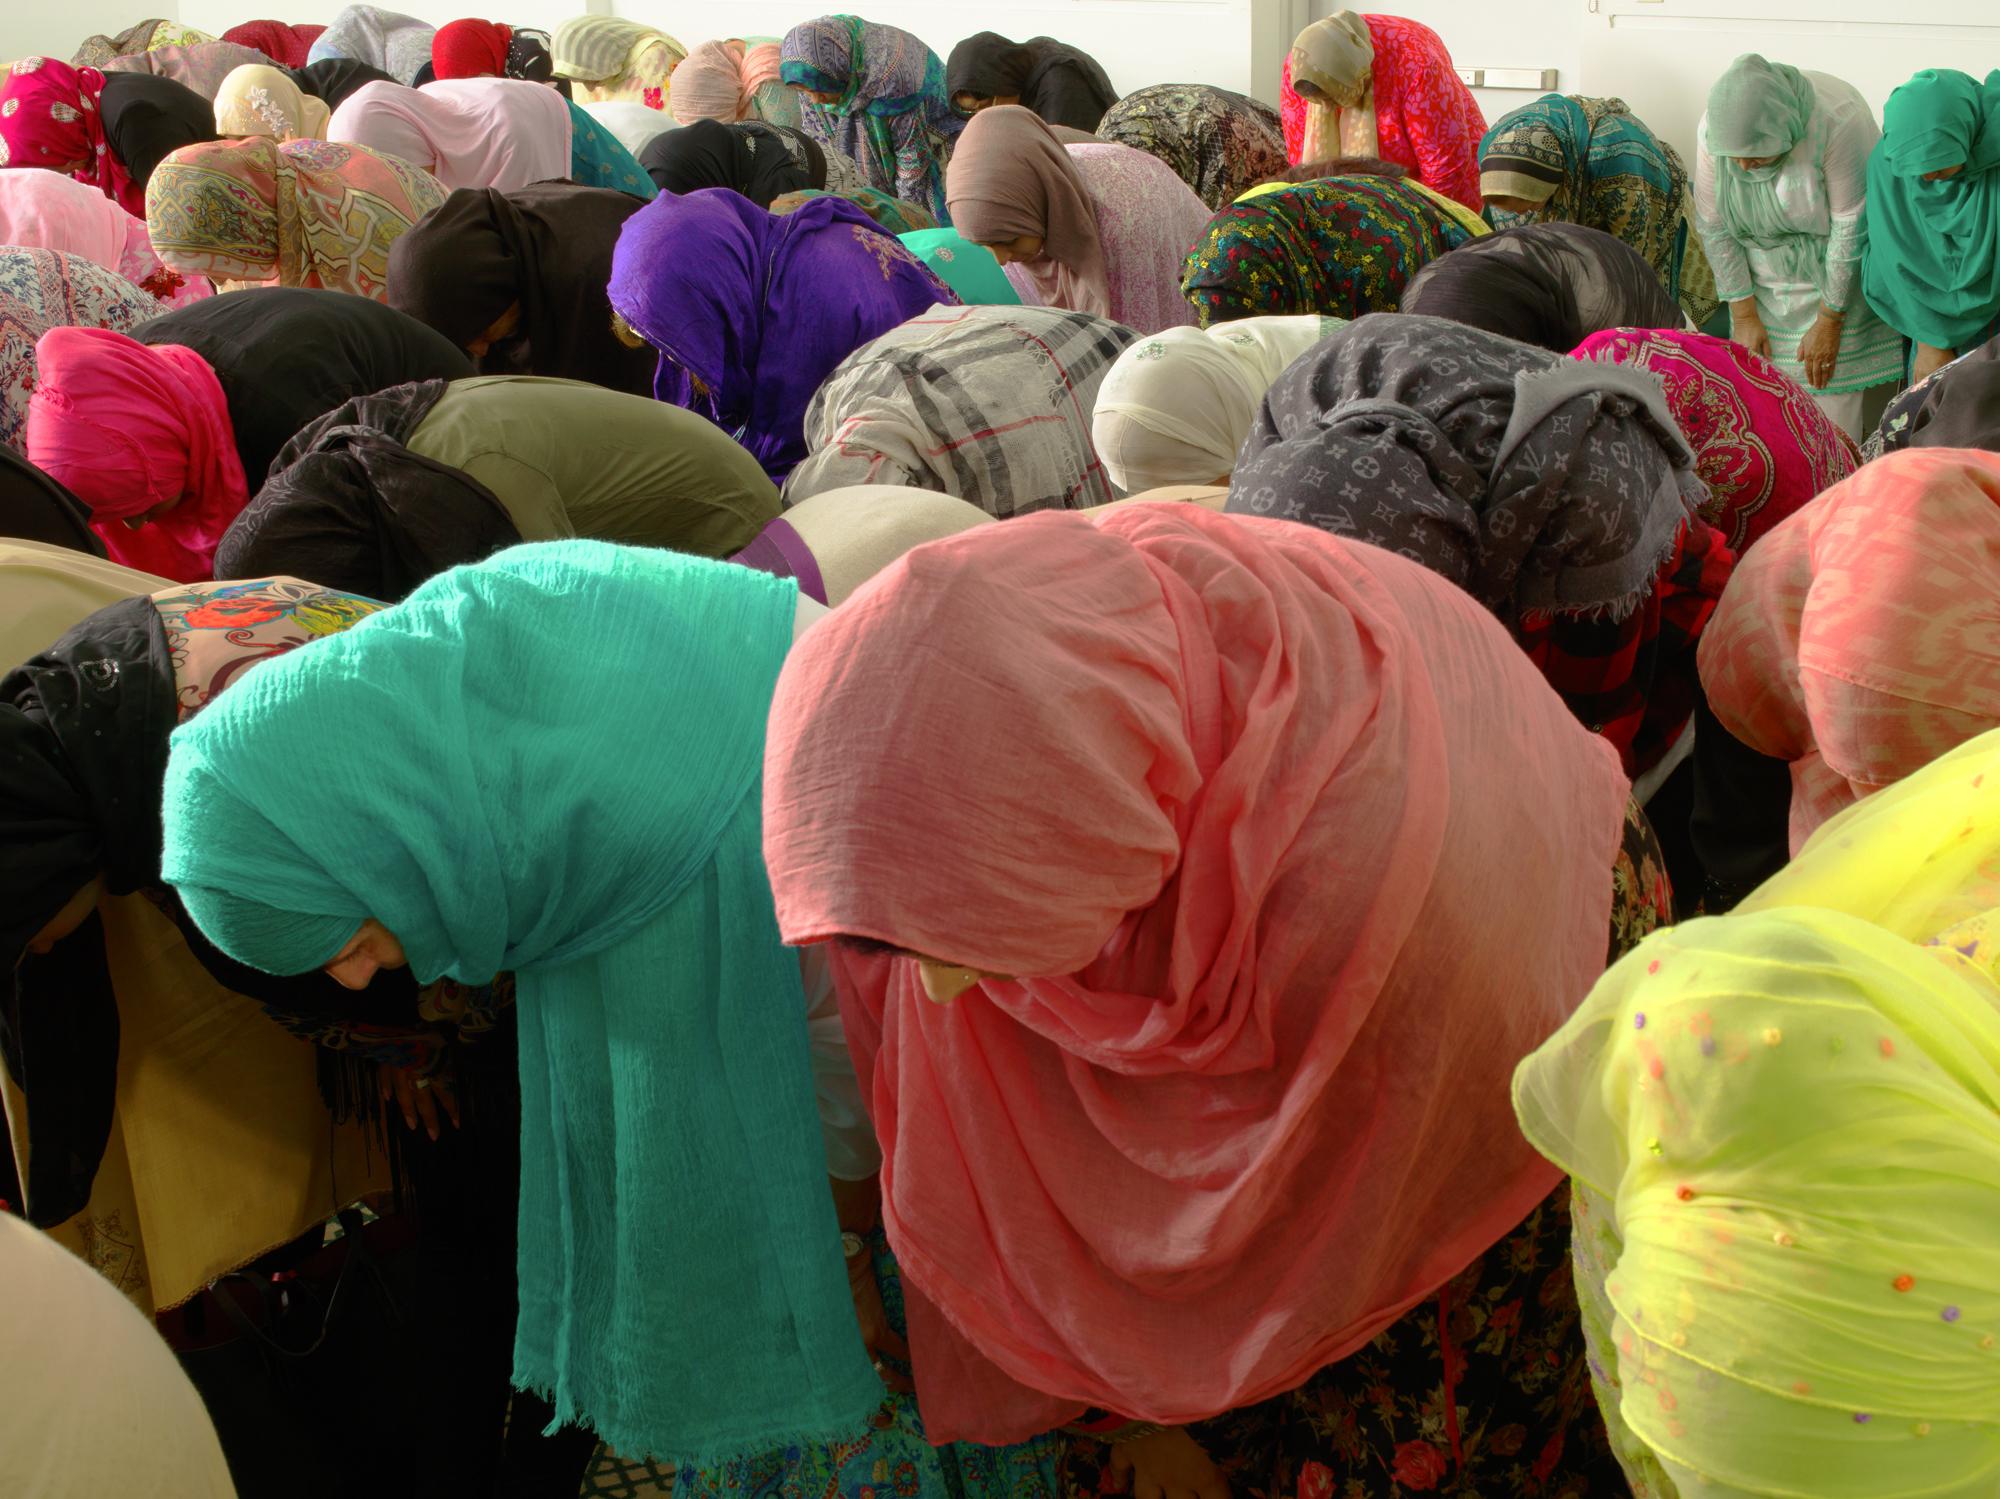 Neal Slavin Color Photograph - Muslim Women Bowing, New York City